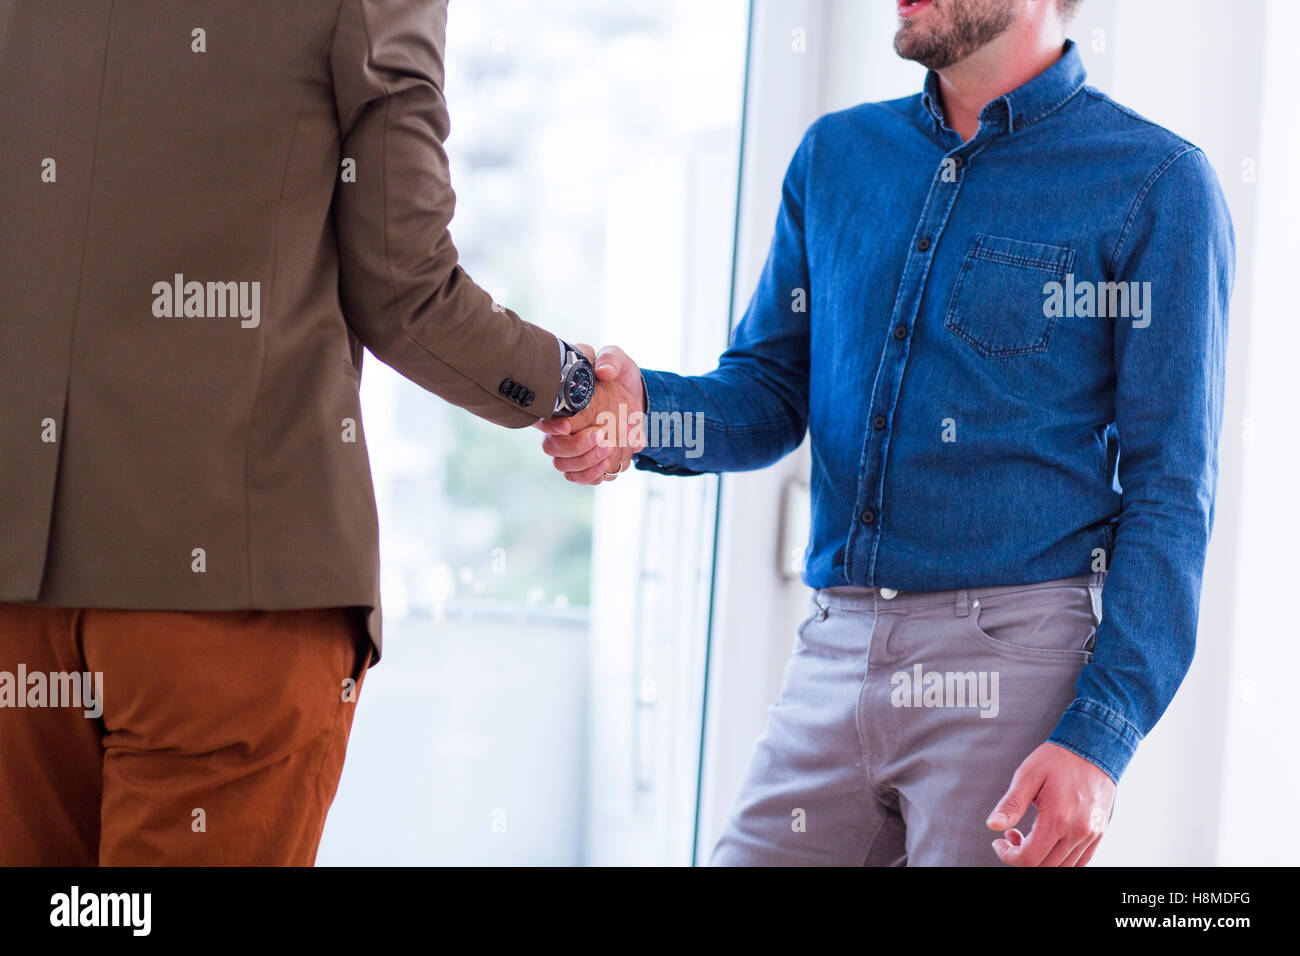 Man and Woman shaking hands in office Stock Photo